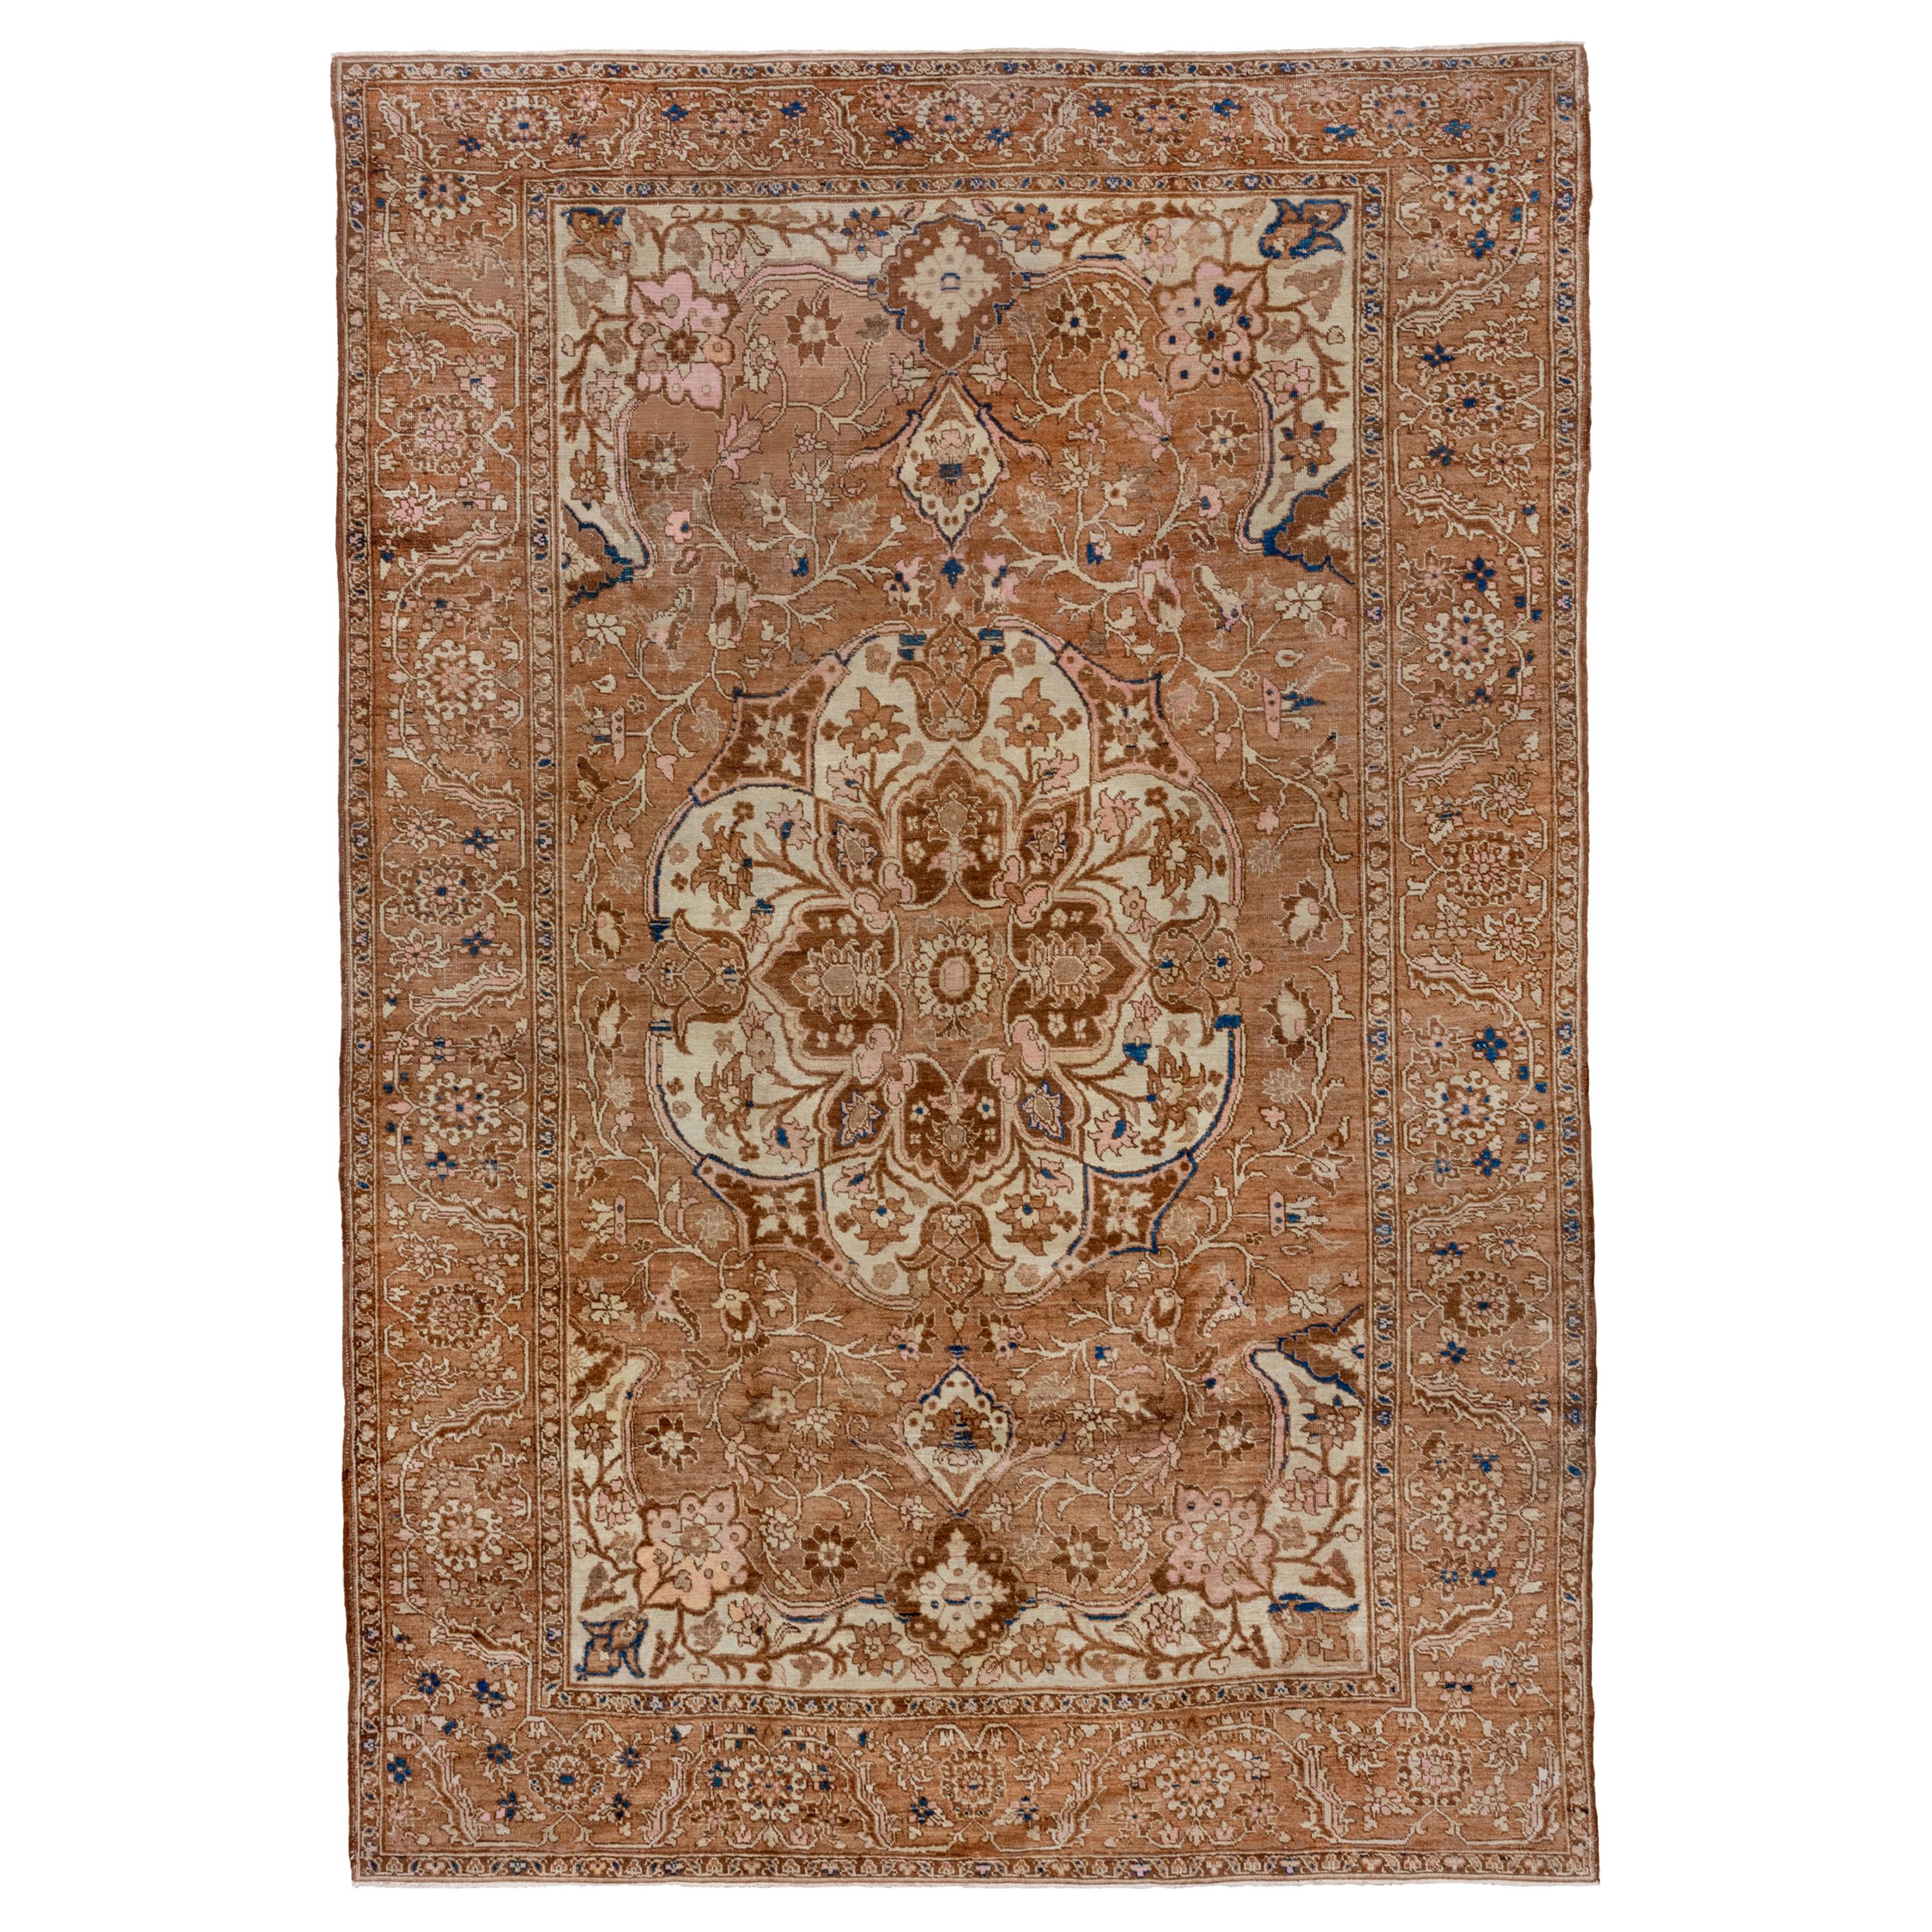 Antique Persian Heriz Serapi Rug, Tan Field with Blue & Pink Accents, Circa 1910 For Sale